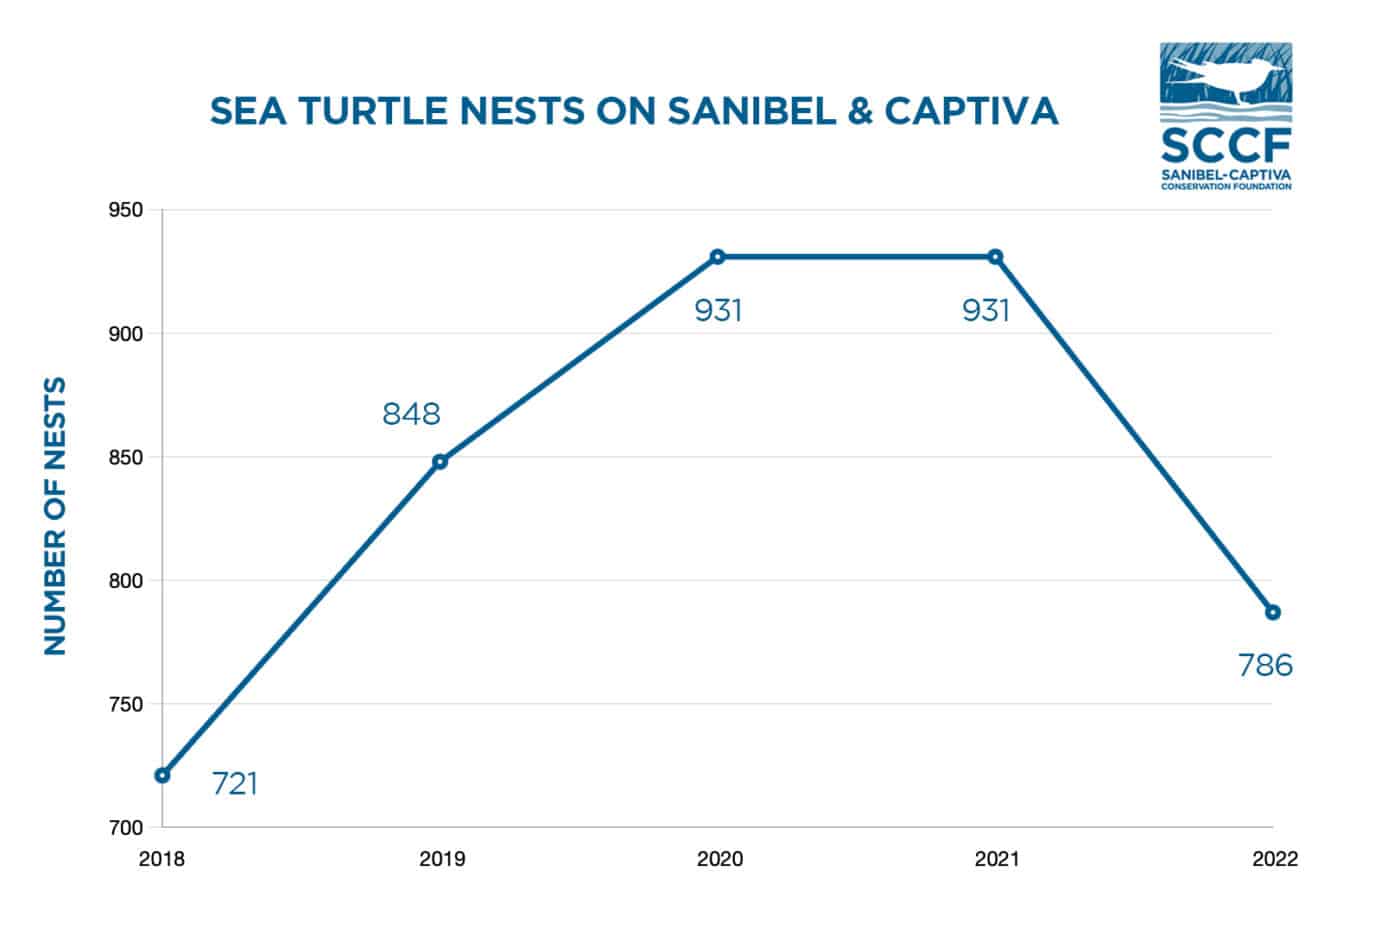 Graph showing number of sea turtle nests on Sanibel and Captiva from 2018 to 2022.